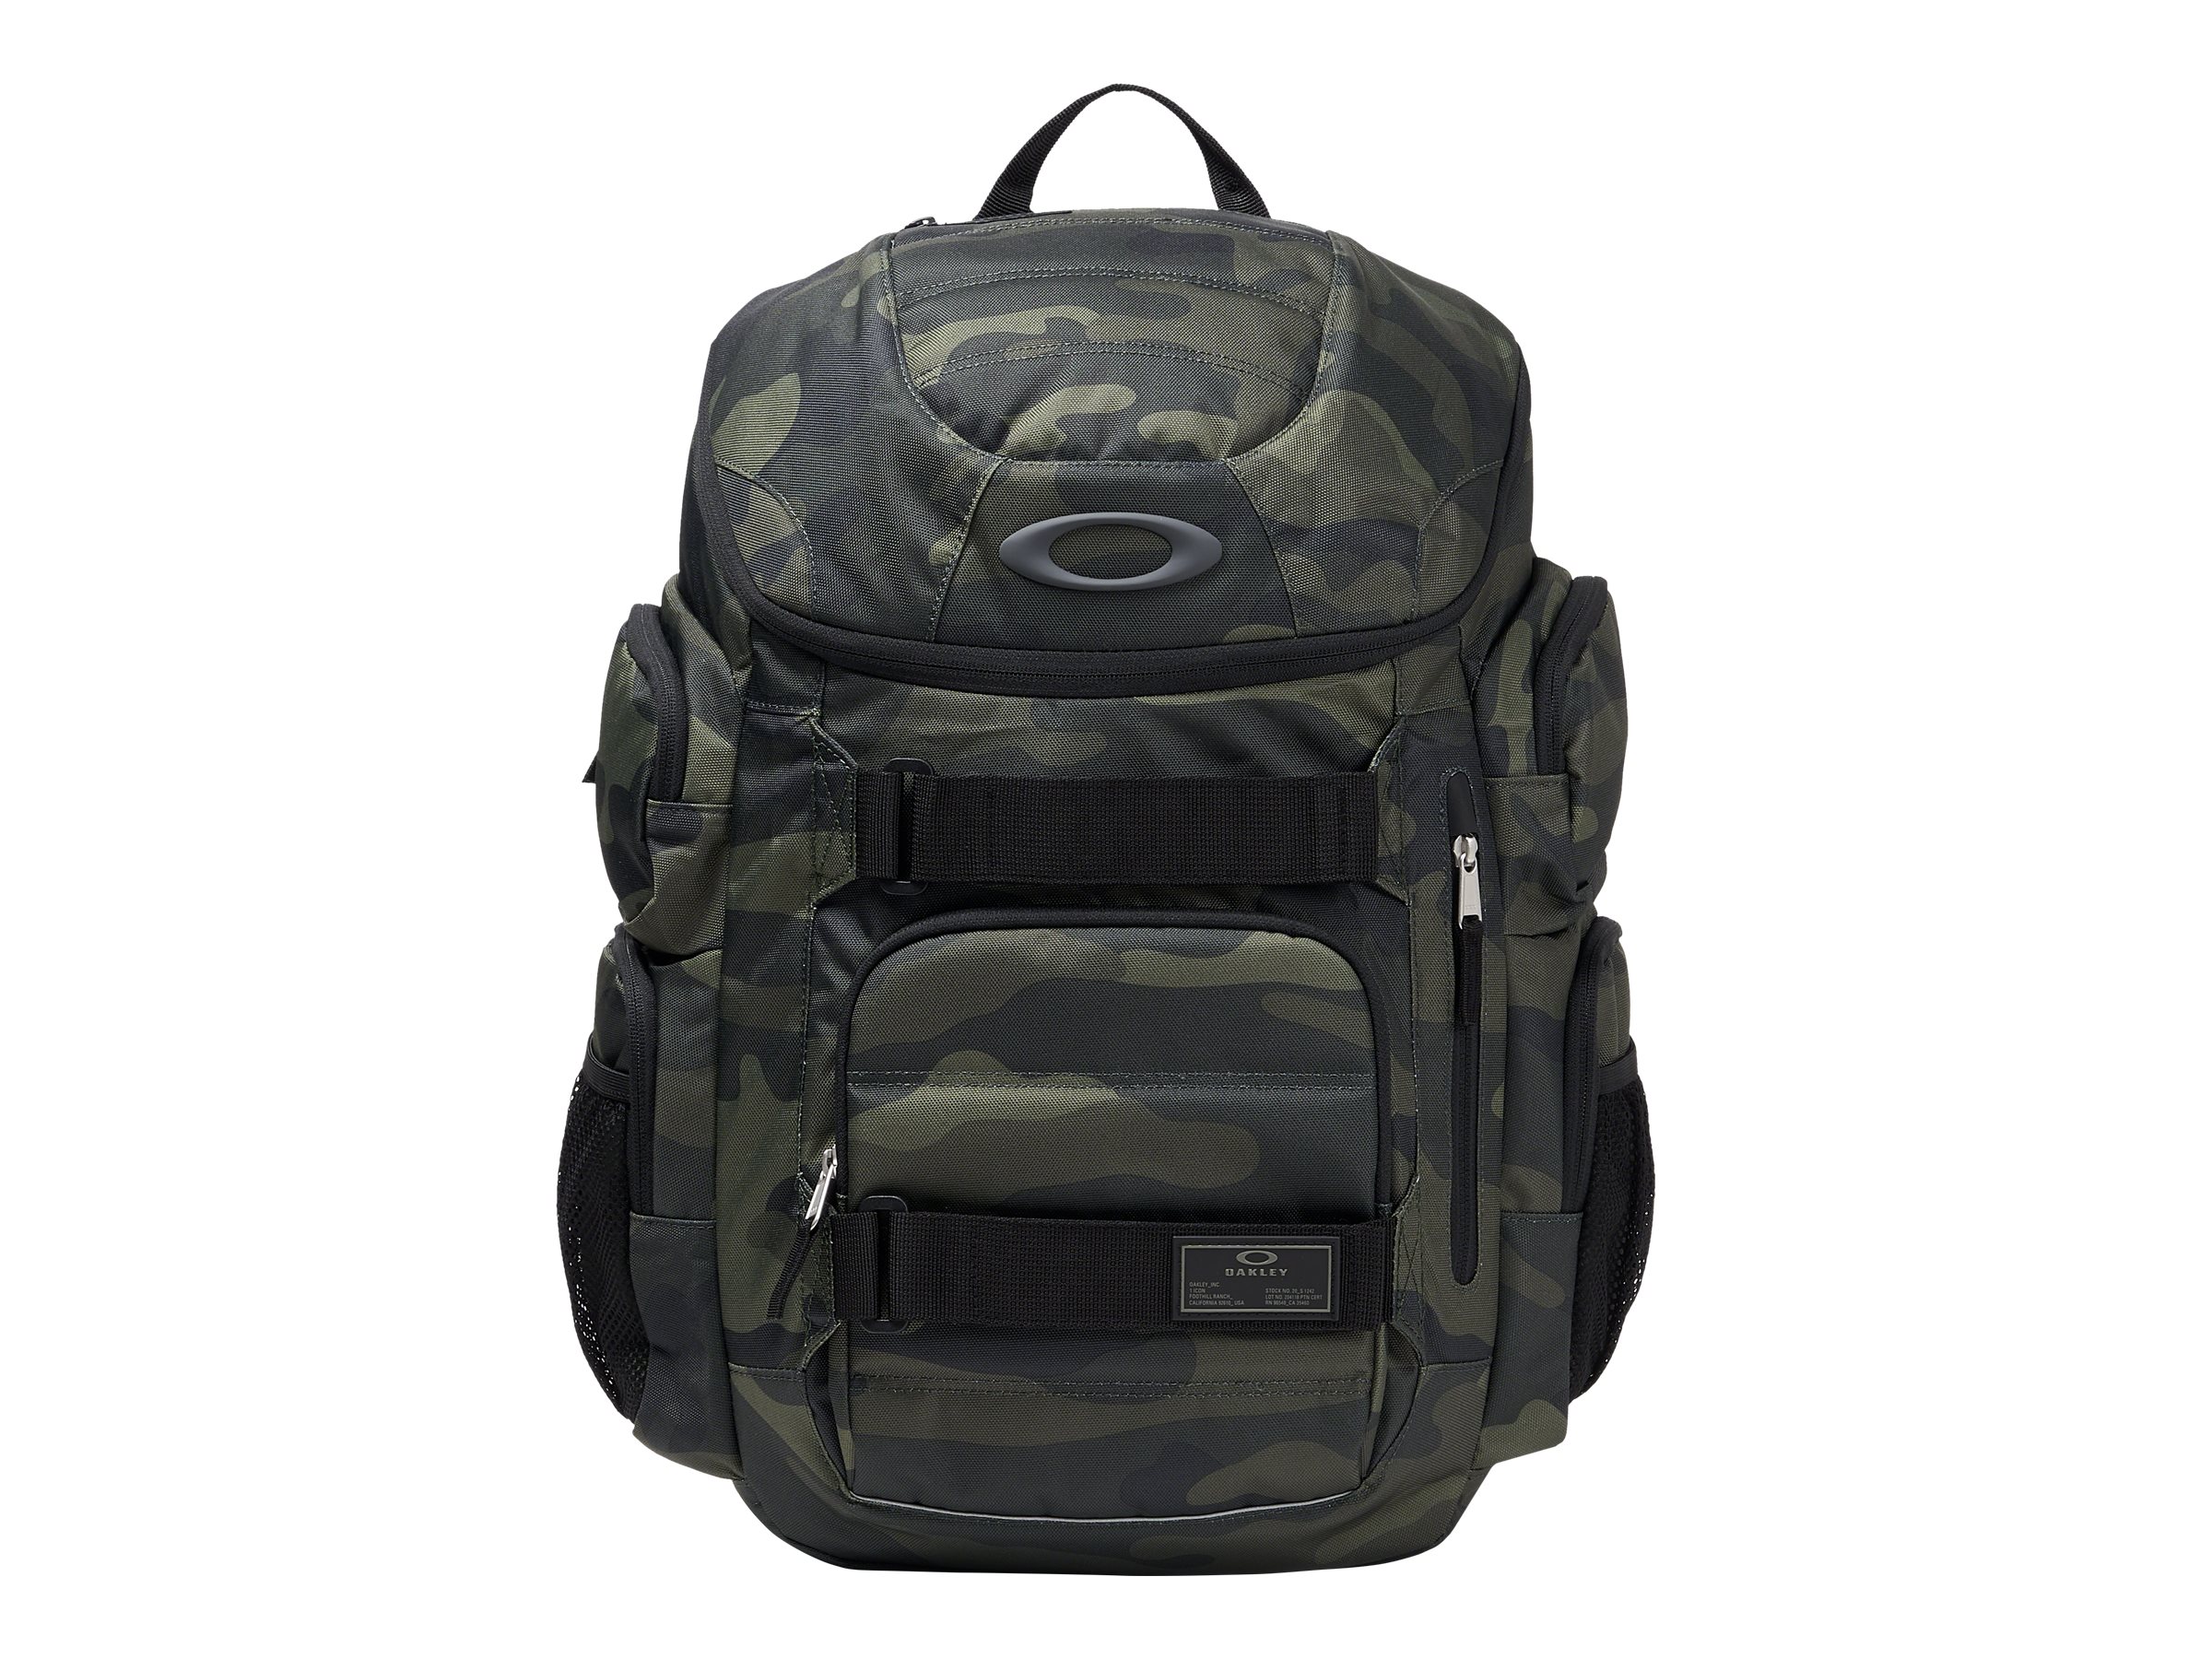 Oakley Enduro 30L 2.0 Backpack - Notebook carrying backpack - 17" - core camo - image 1 of 4